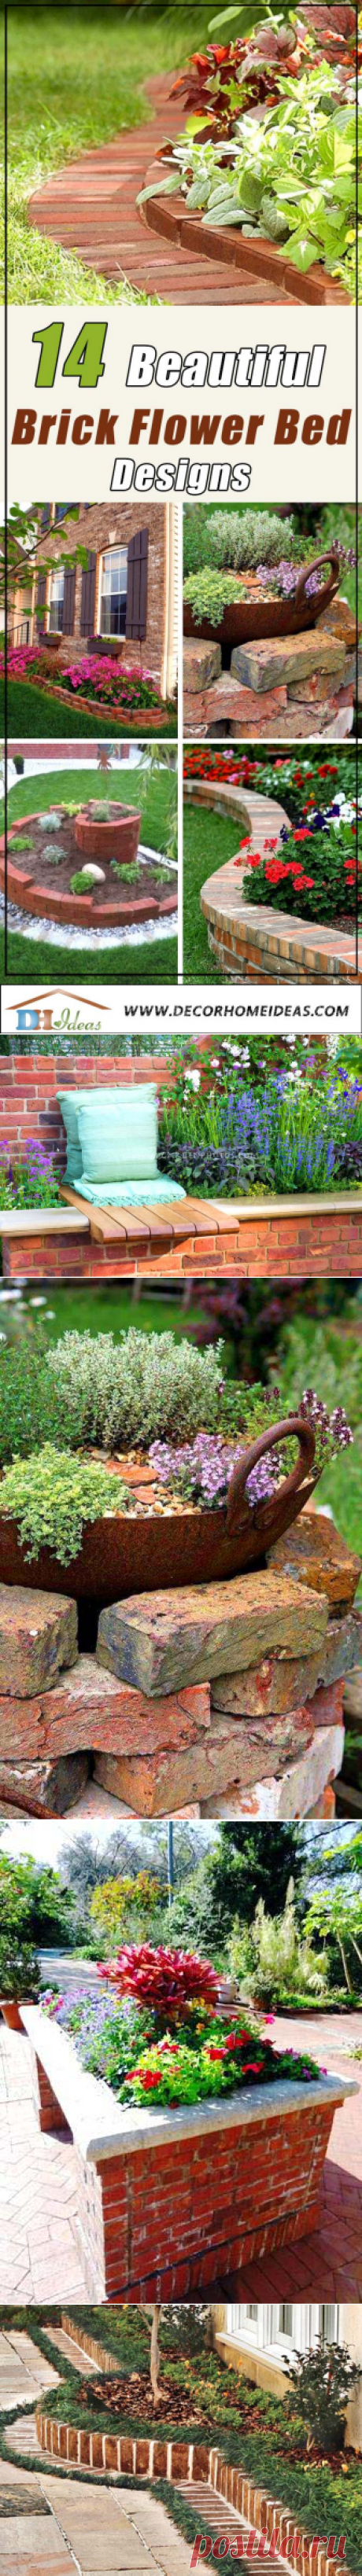 14 Brick Flower Bed Design Ideas You Can Replicate Instantly | Decor Home Ideas